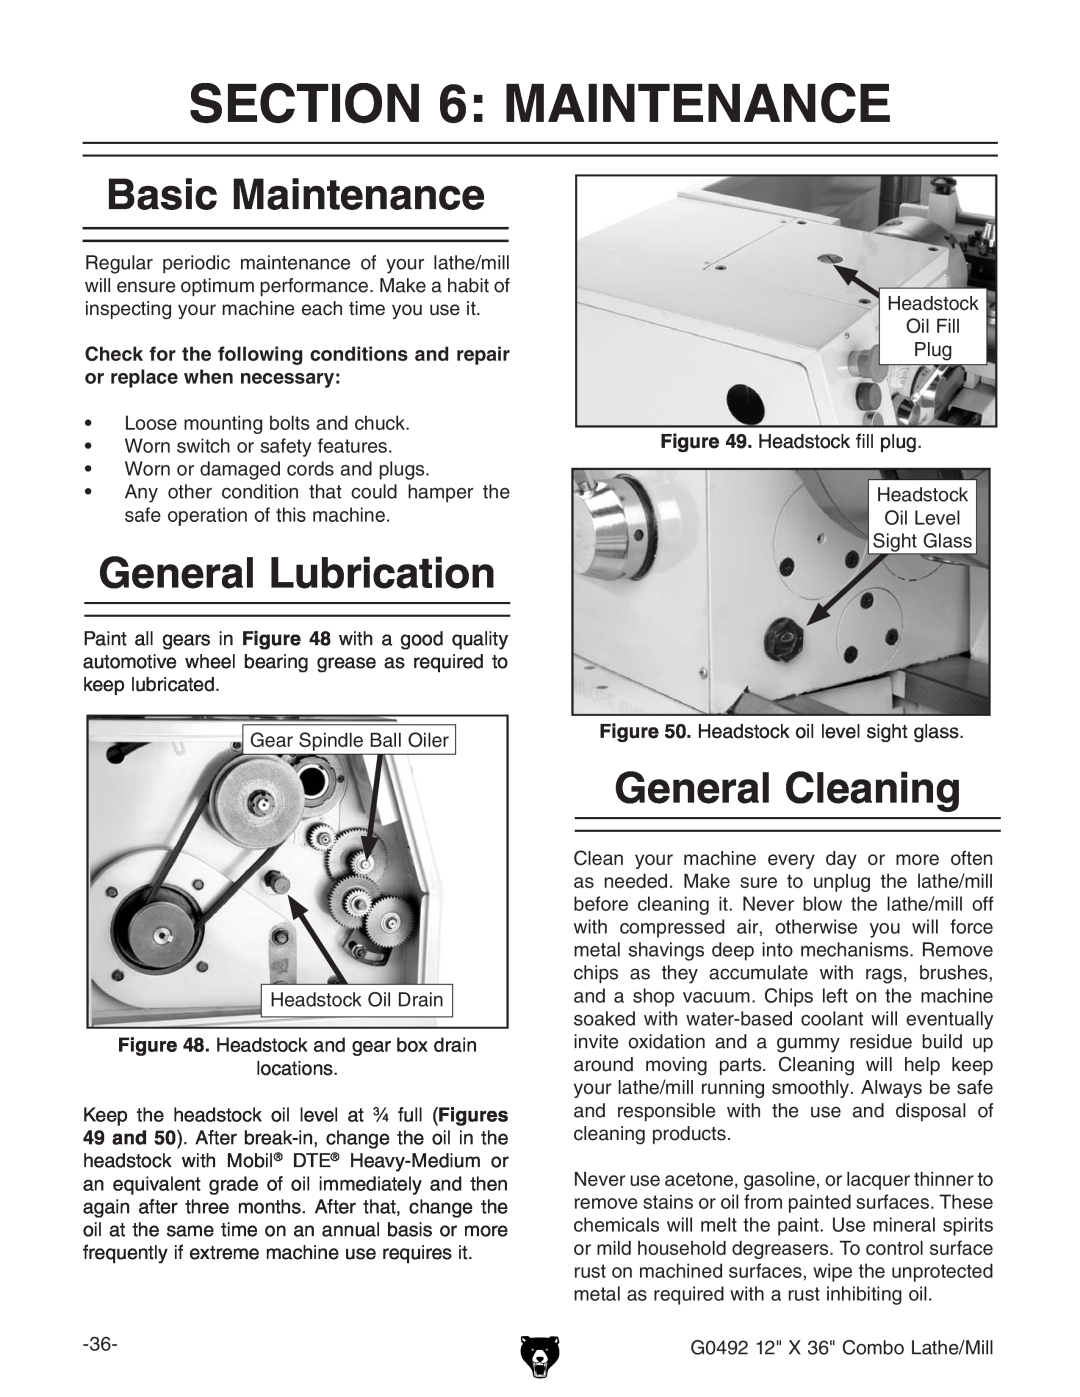 Grizzly G0492 manual Basic Maintenance, General Lubrication, General Cleaning, s LdgcdgYVbV\ZYXdgYhVcYeaj\h# 